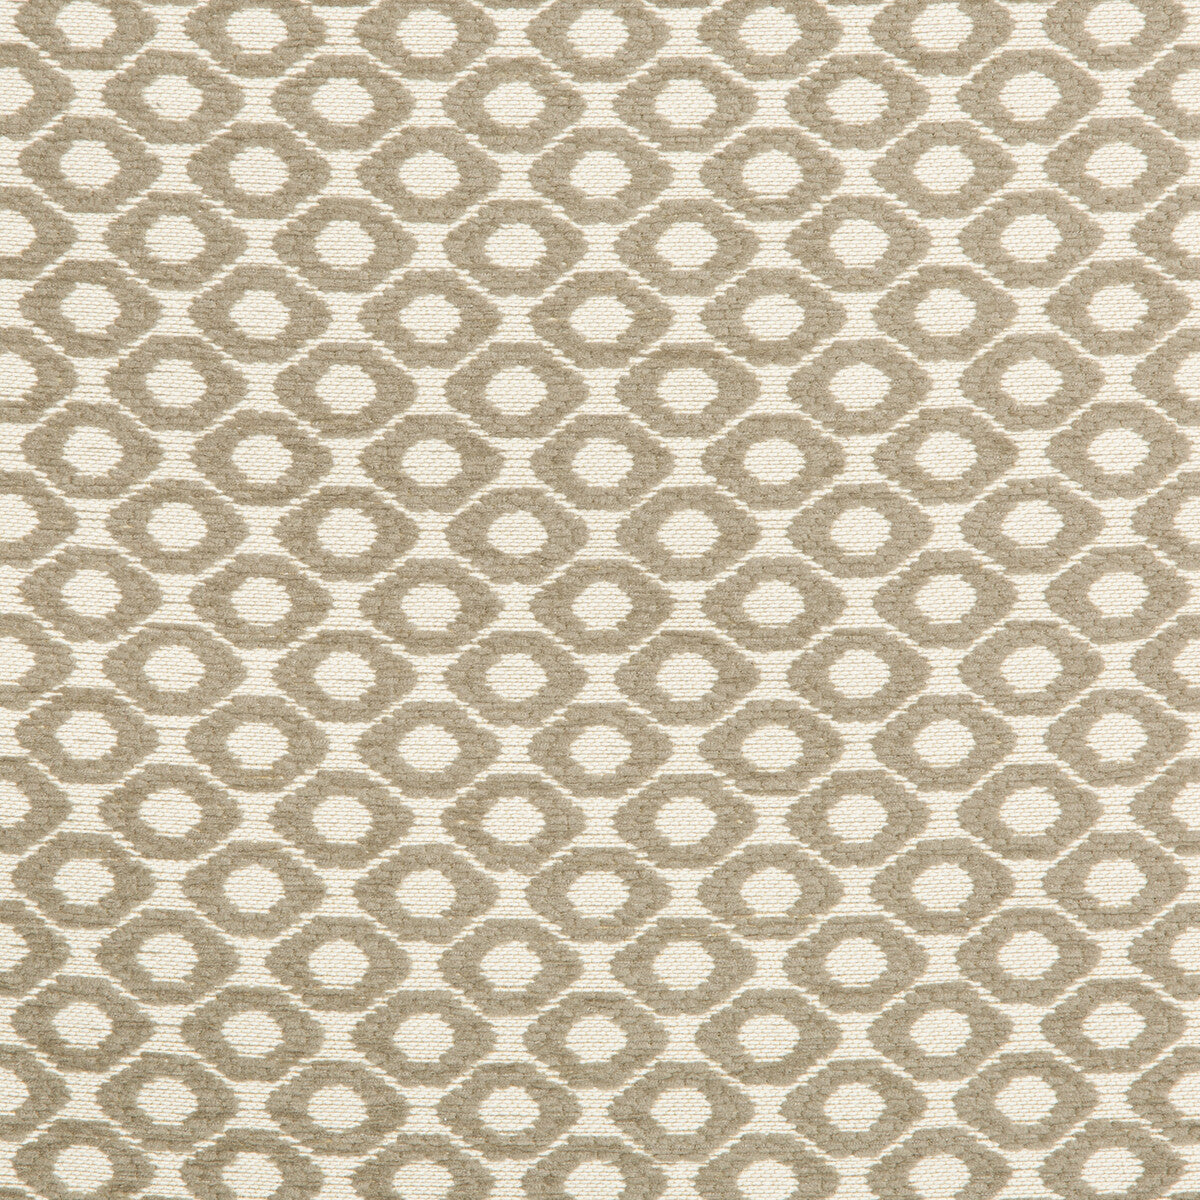 Pave The Way fabric in fawn color - pattern 35867.106.0 - by Kravet Contract in the Gis Crypton collection